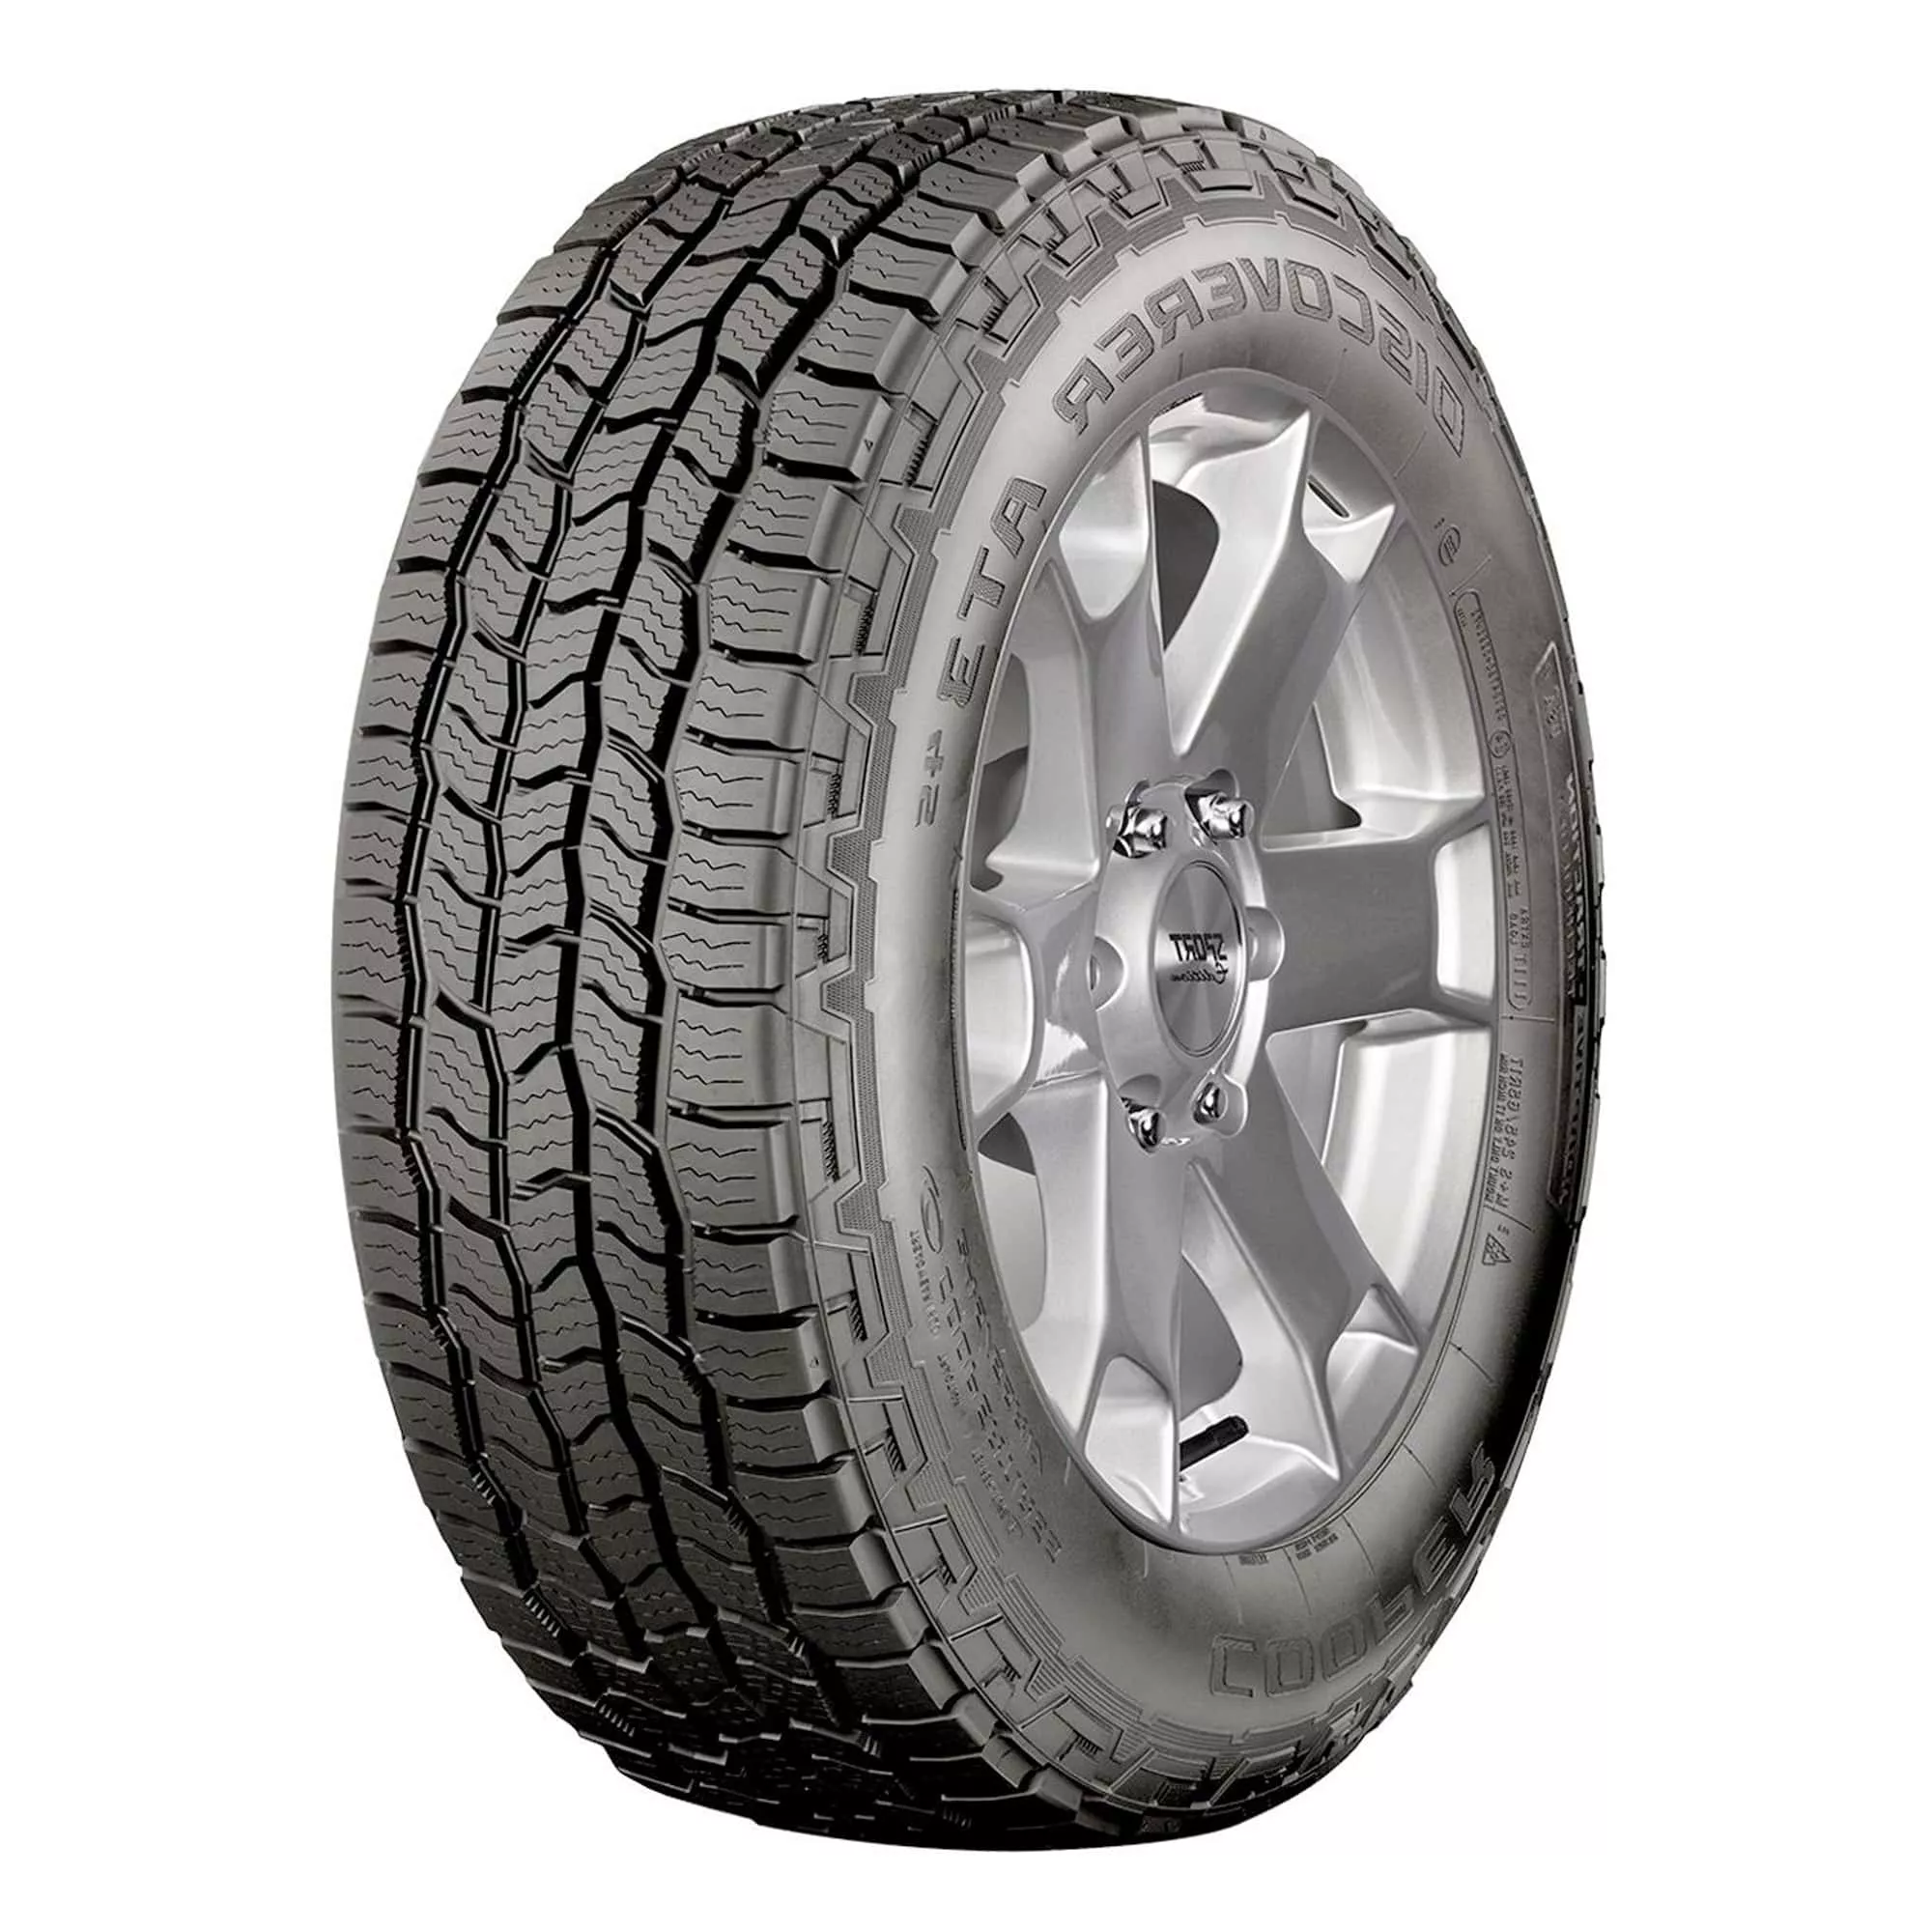 Шина 265/65R18 114T Discoverer A/T 3